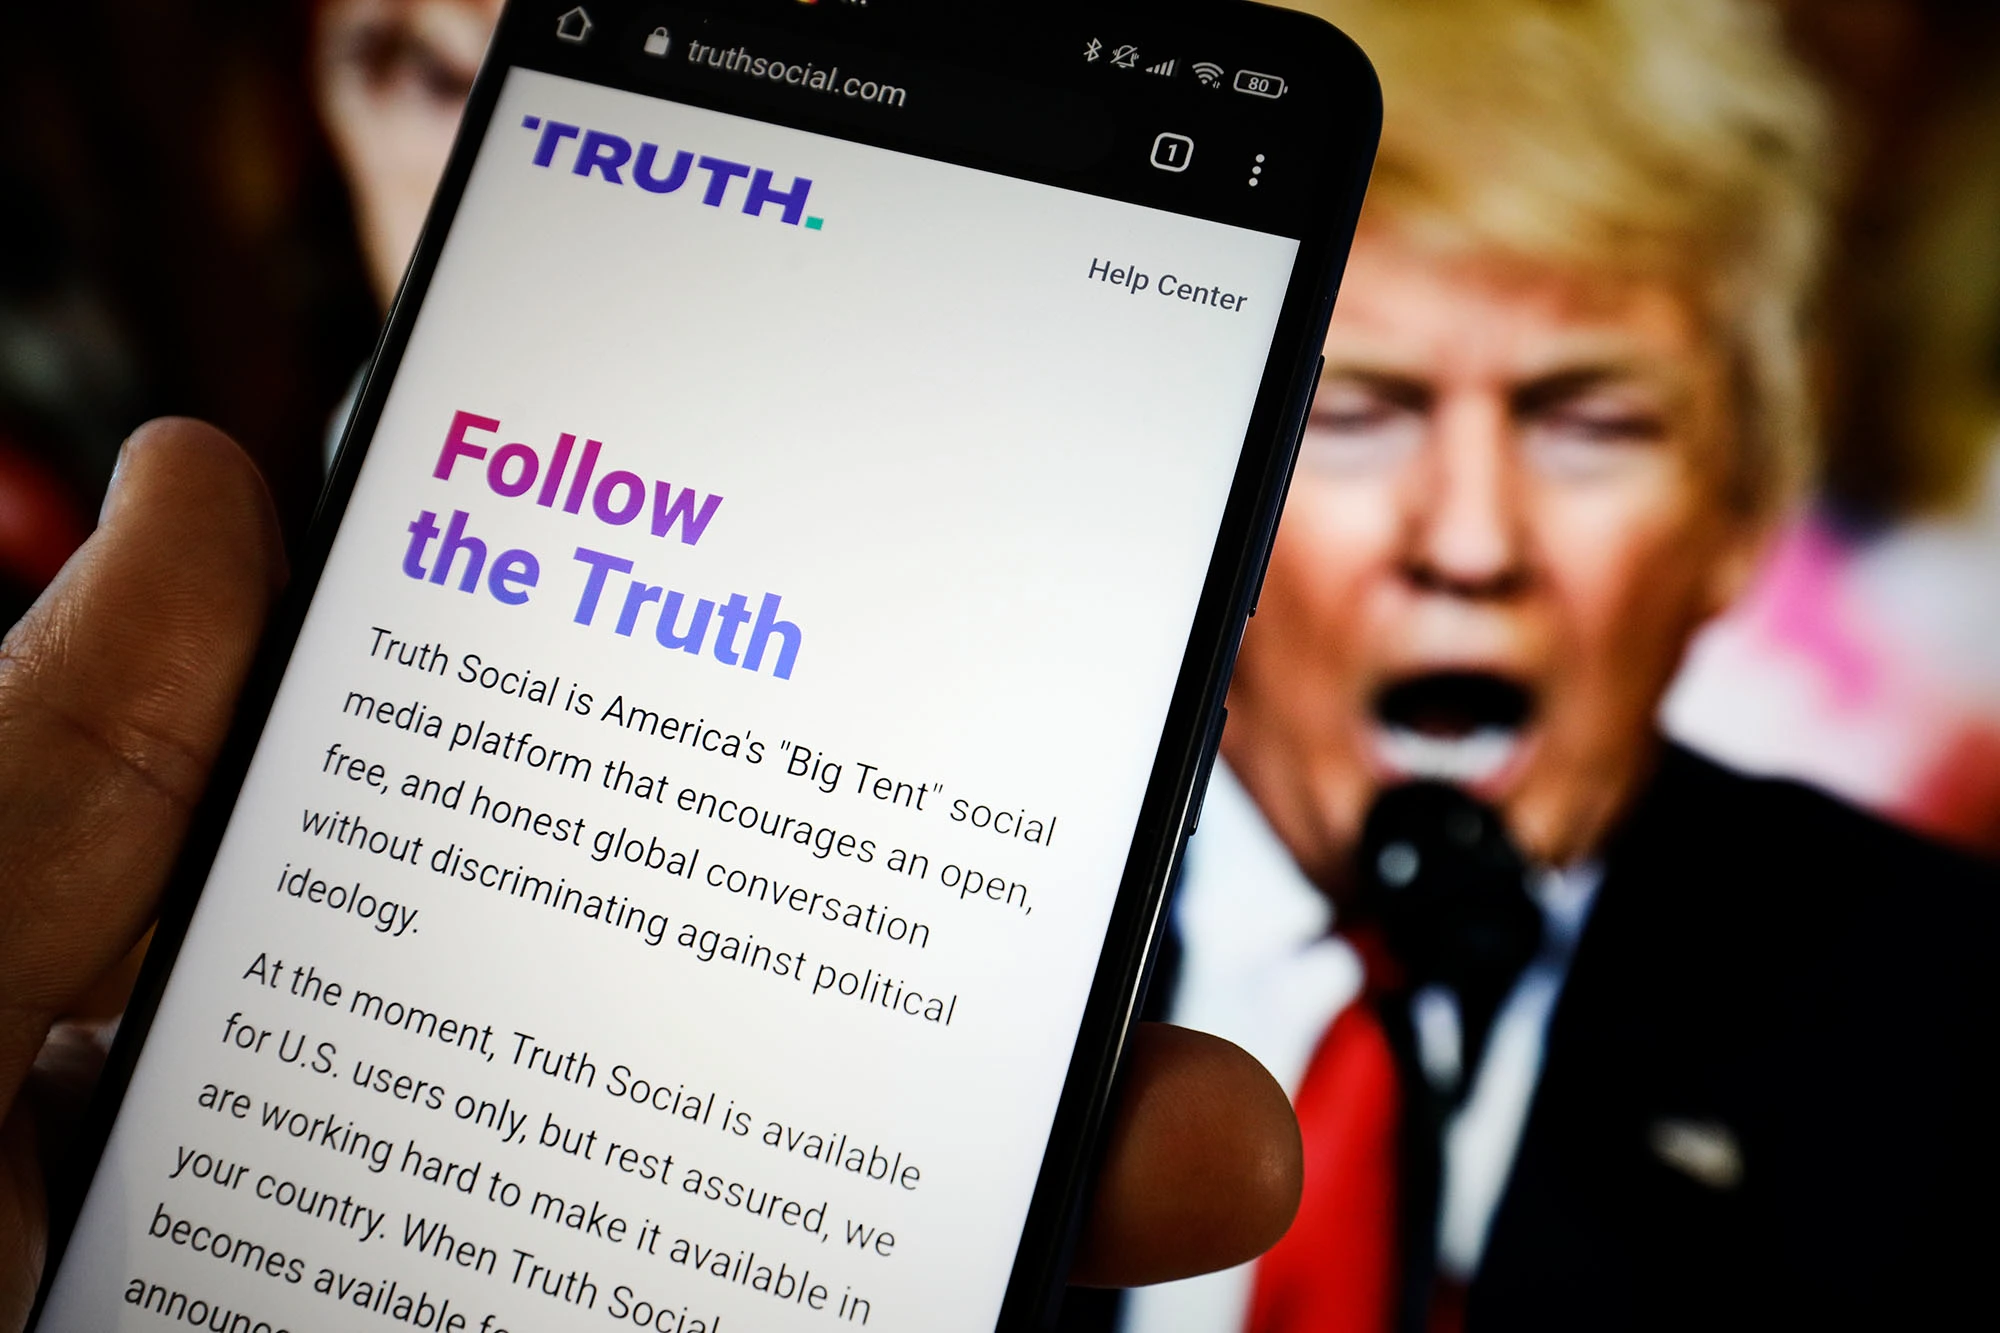 Musk mentioned that Truth Social should be renamed Trumpet. Musk’s suggestion to change Trump’s app name came after ‘Truth Social’ topped the Apple store chart.